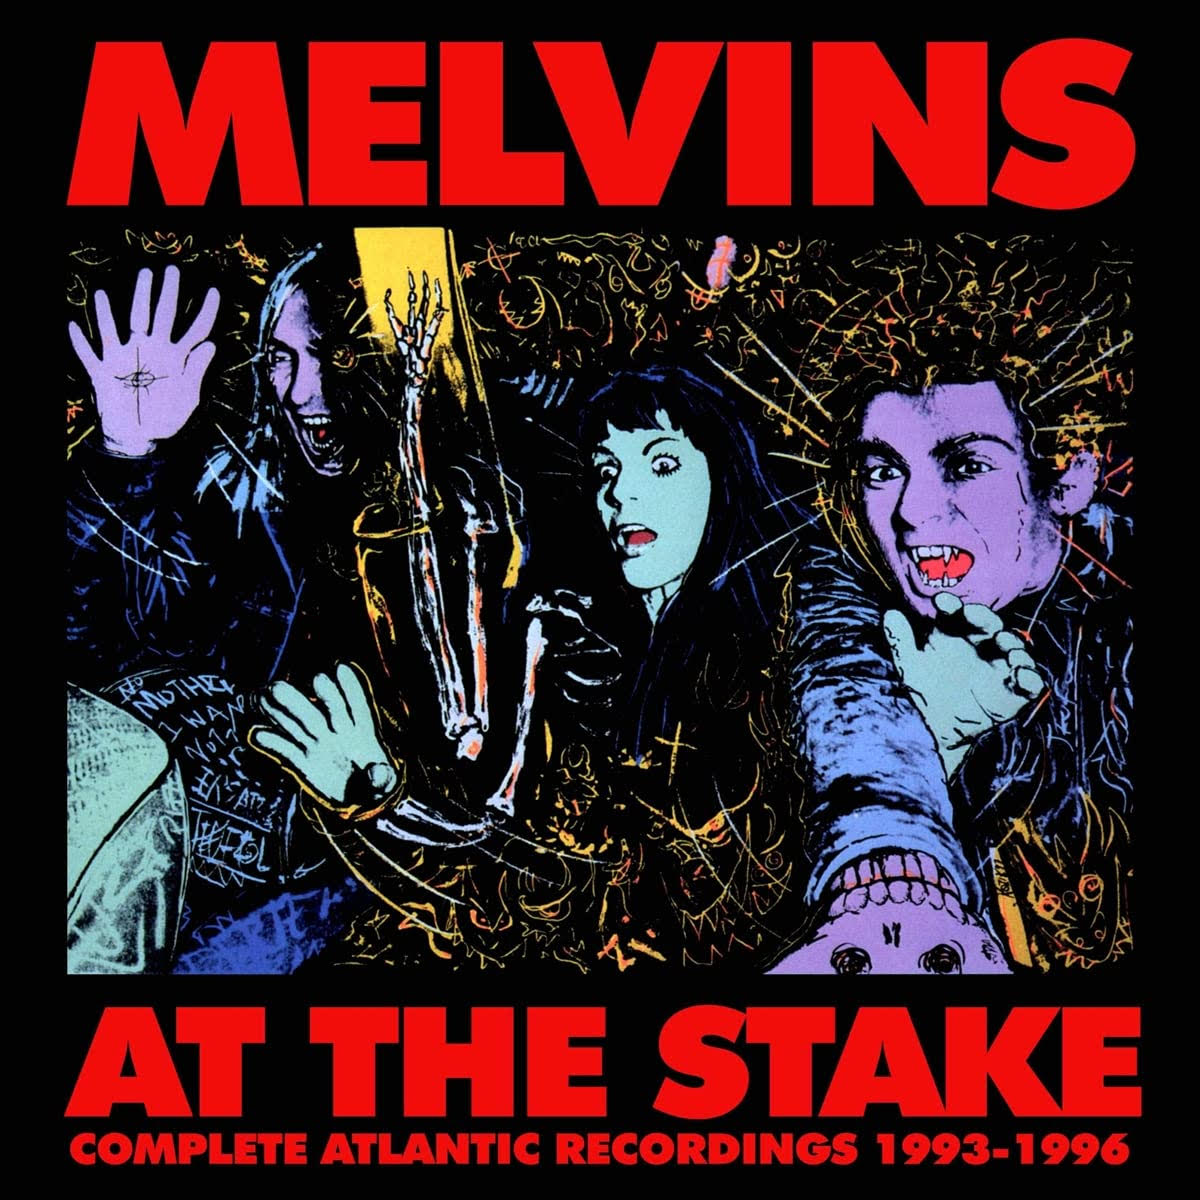 Melvins - At The Stake – Atlantic Recordings 1993-1995 (3 CD Box Set - Imported)